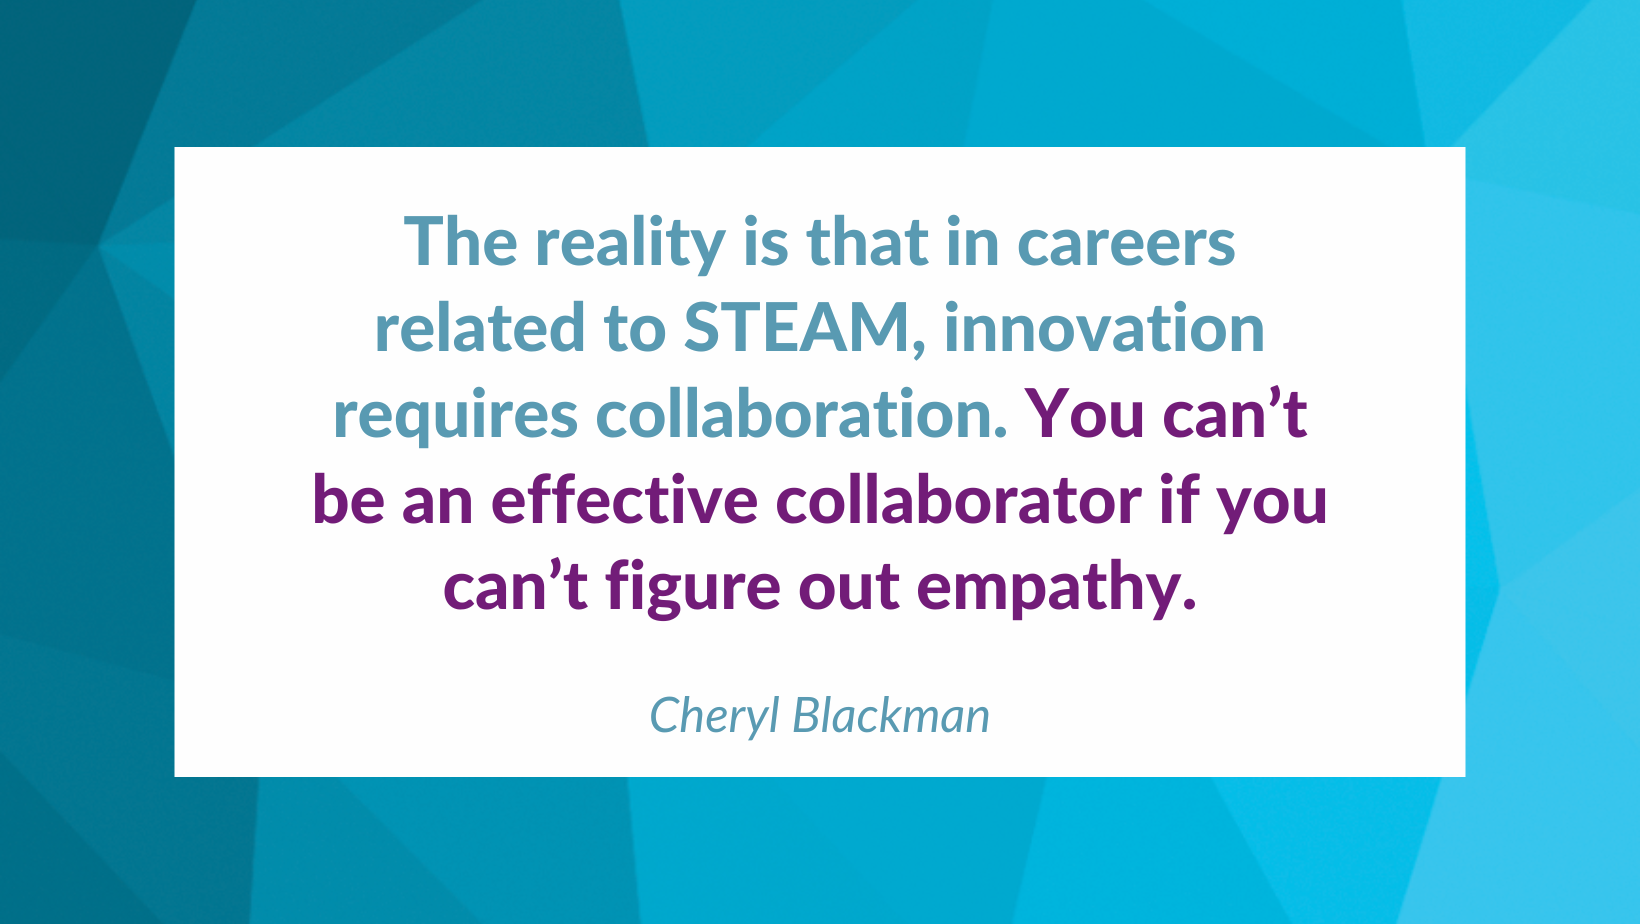 A quote from the article is on a blue background. It reads The reality is that in careers related to STEAM, innovation requires collaboration. You can’t be an effective collaborator if you can’t figure out empathy.